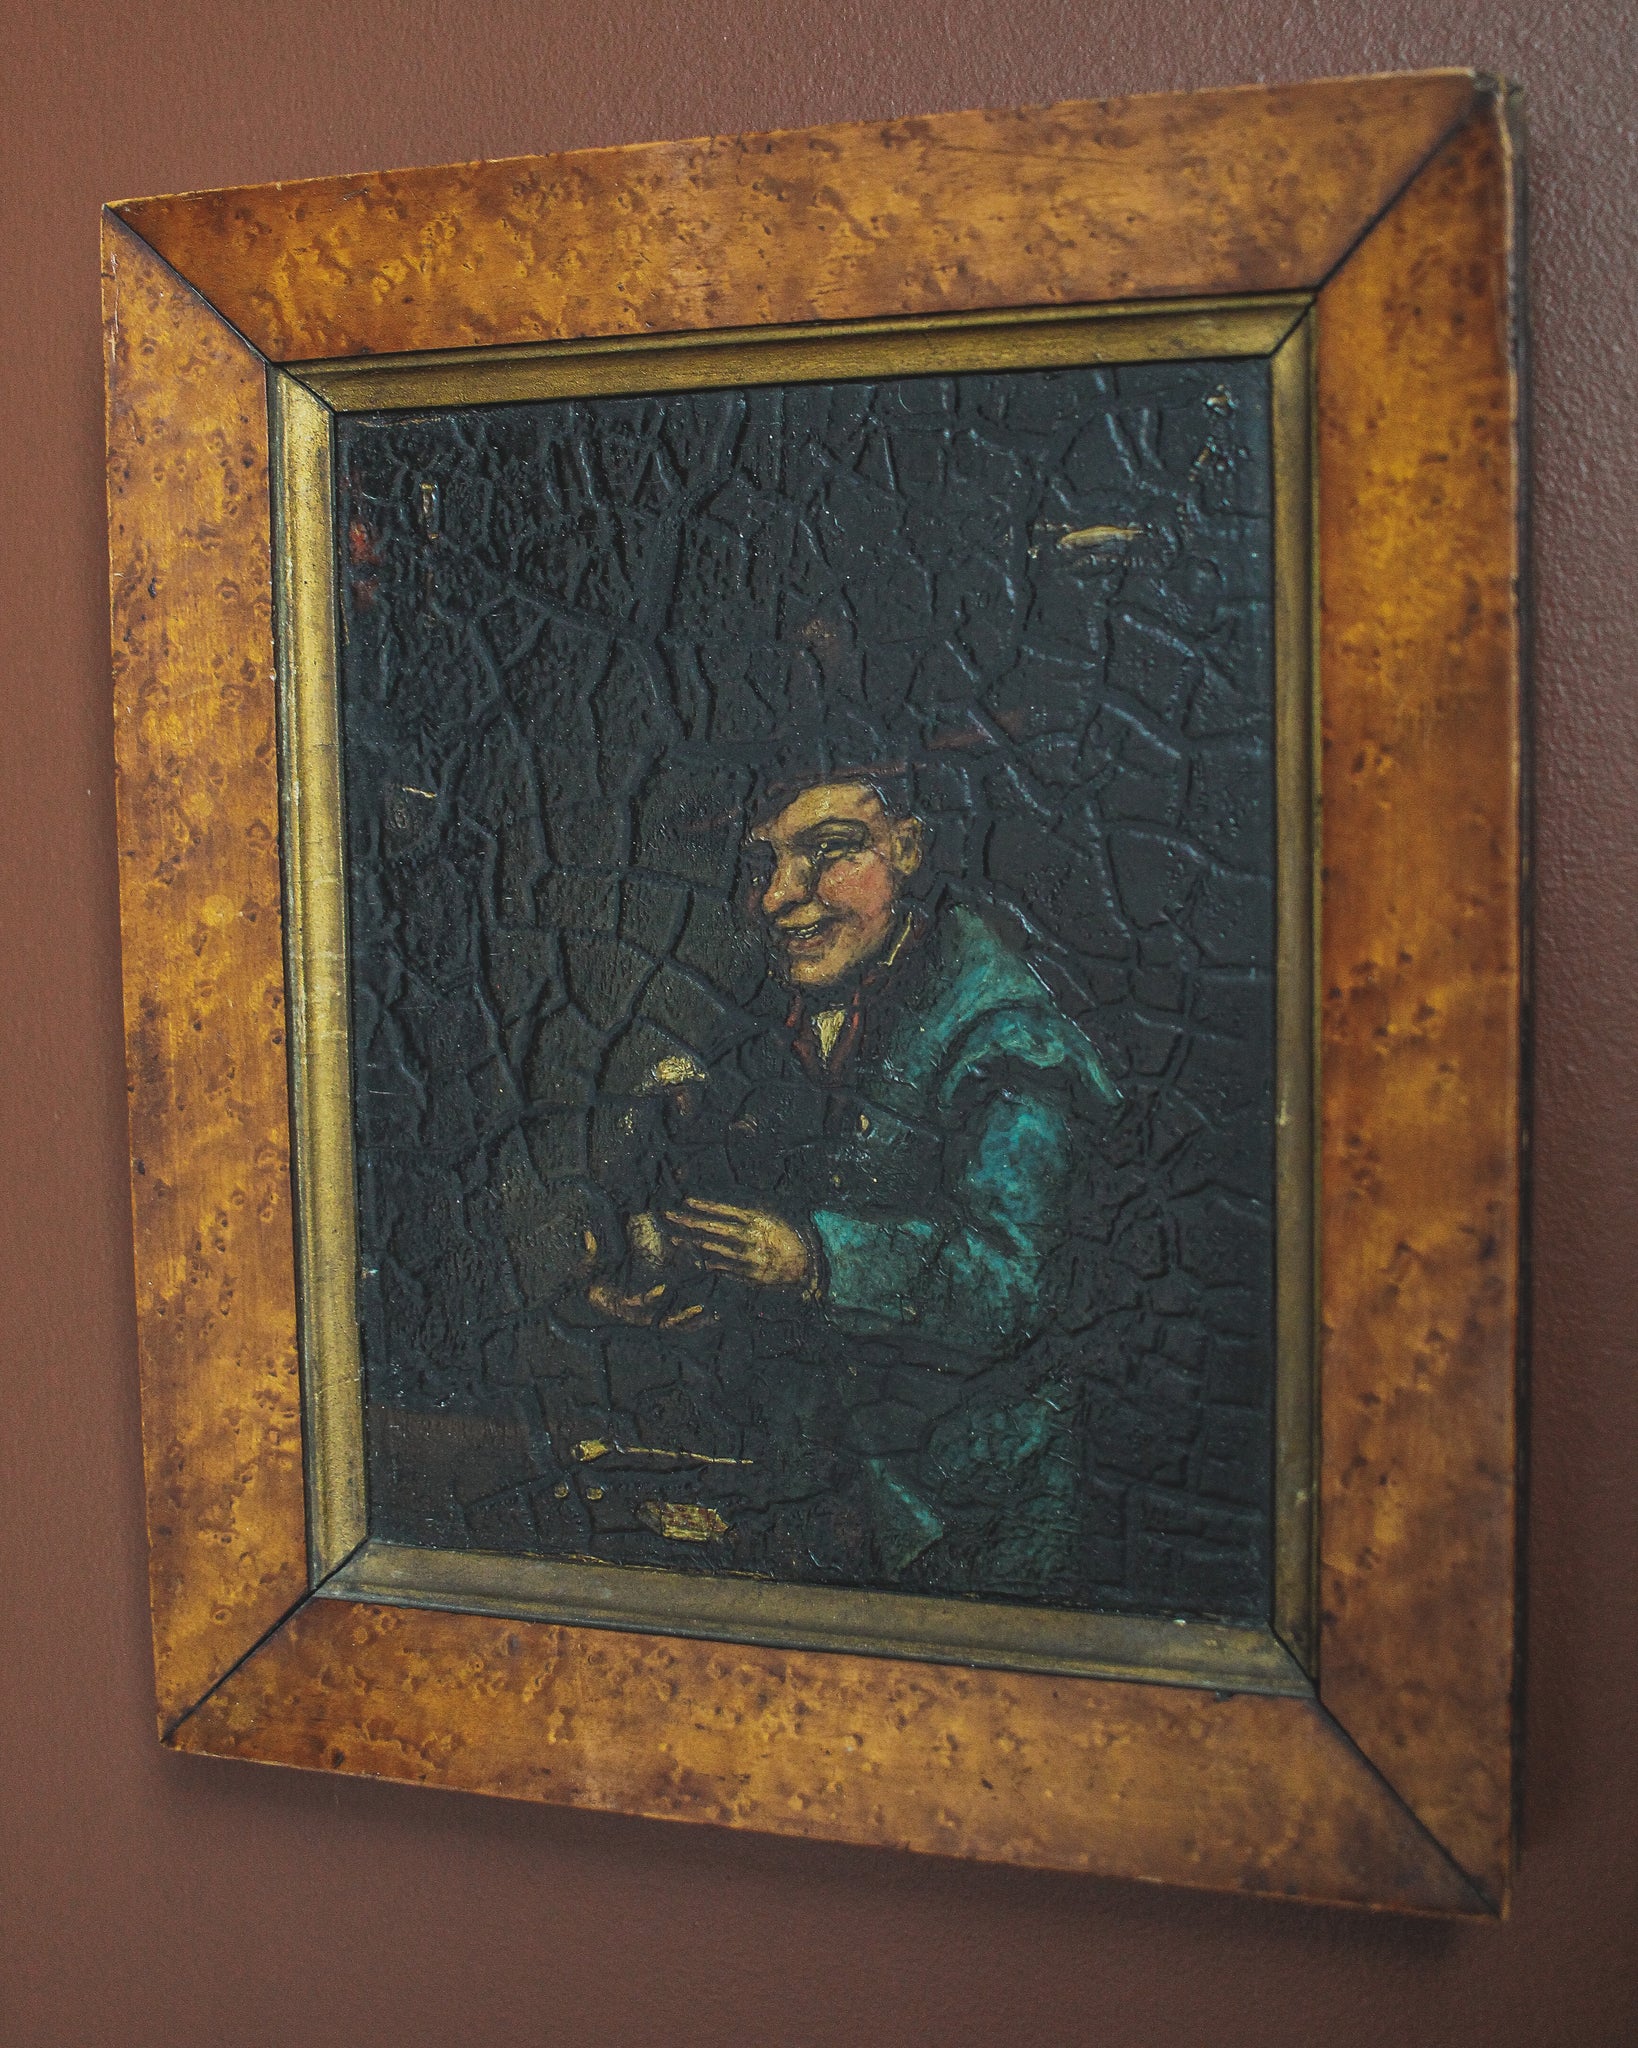 Grotesque Alchemist, Attr. to David Teniers the Younger, Oil on Board